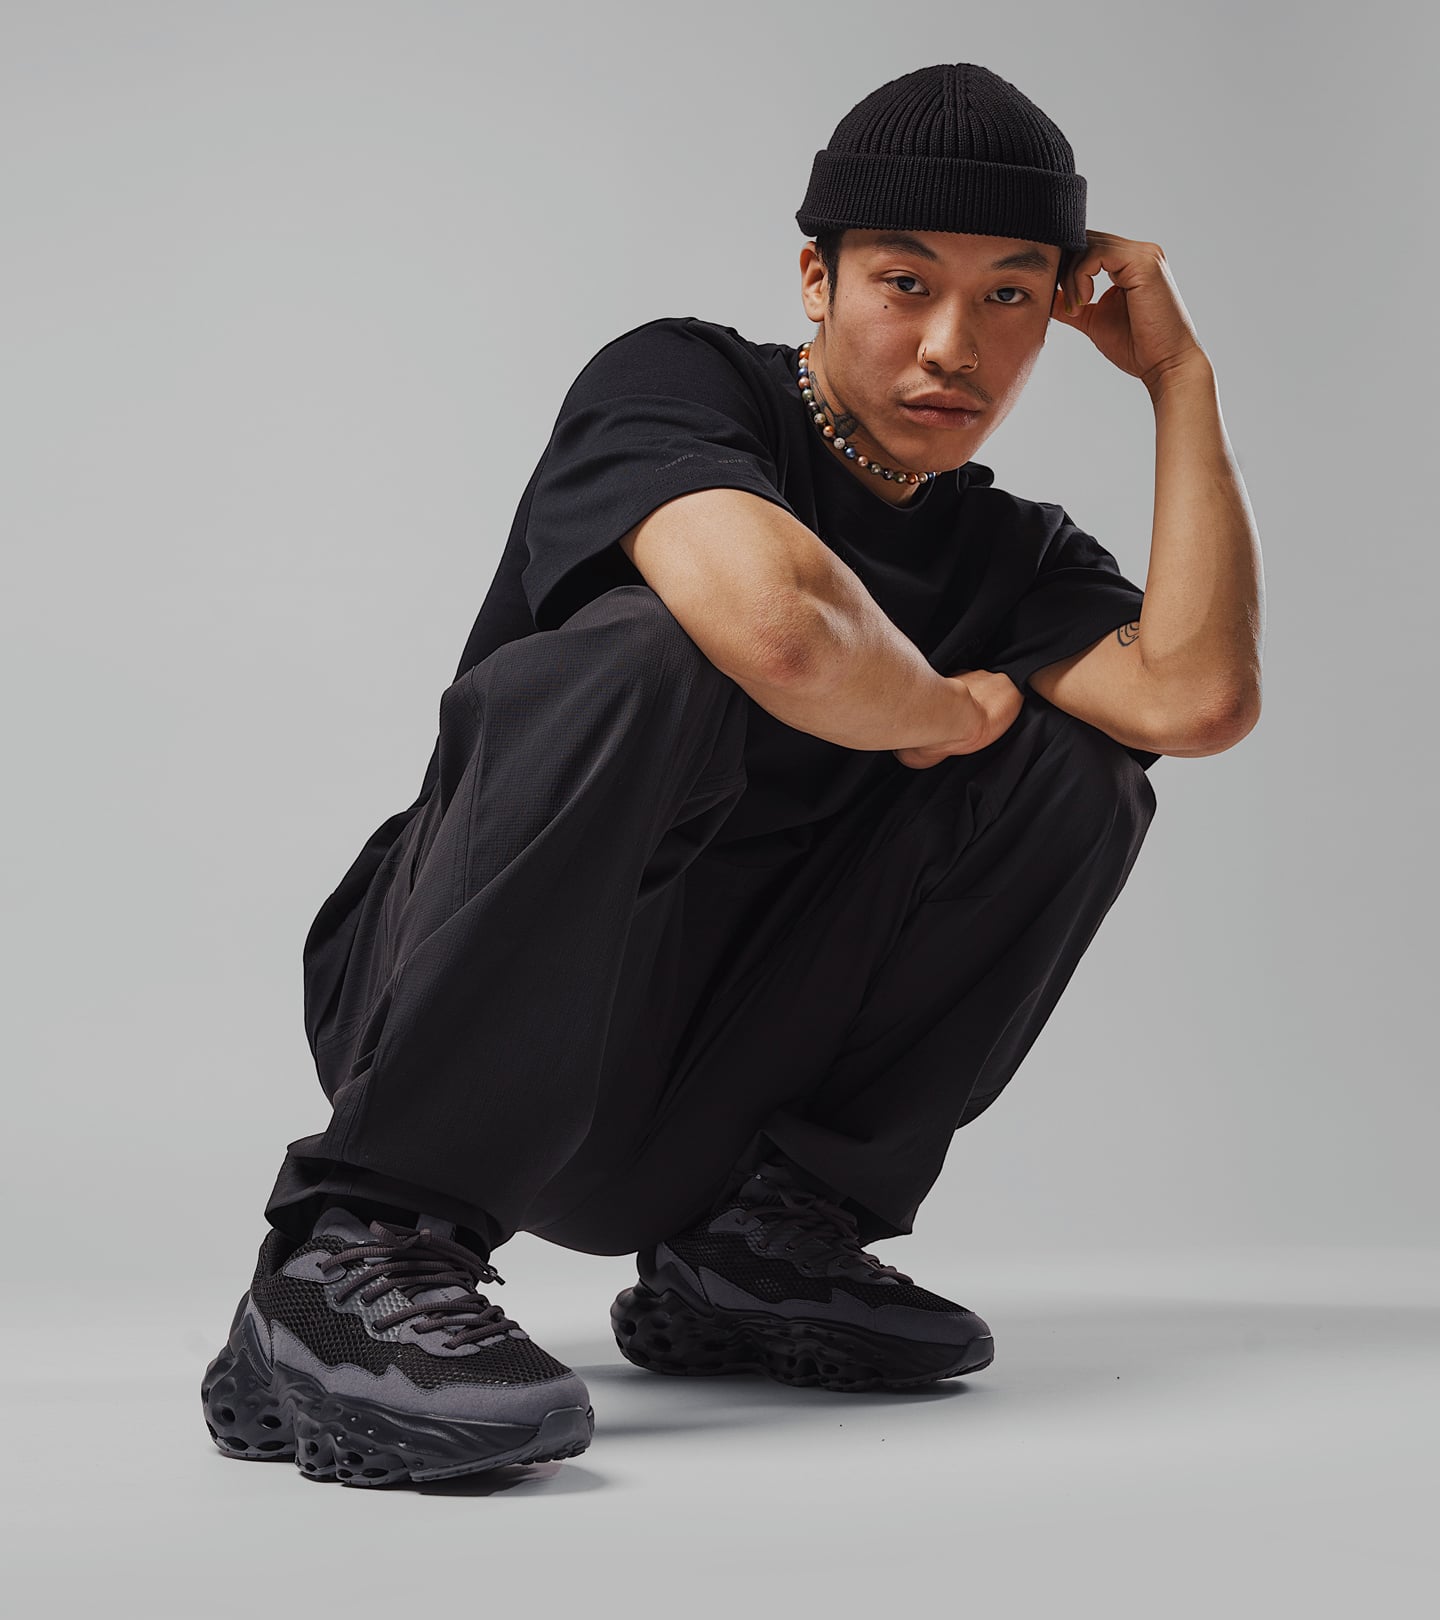 Campaign photo of a male model sitting in a squat position, wearing the Seed.One Black Mud colorway and Black Mud apparel